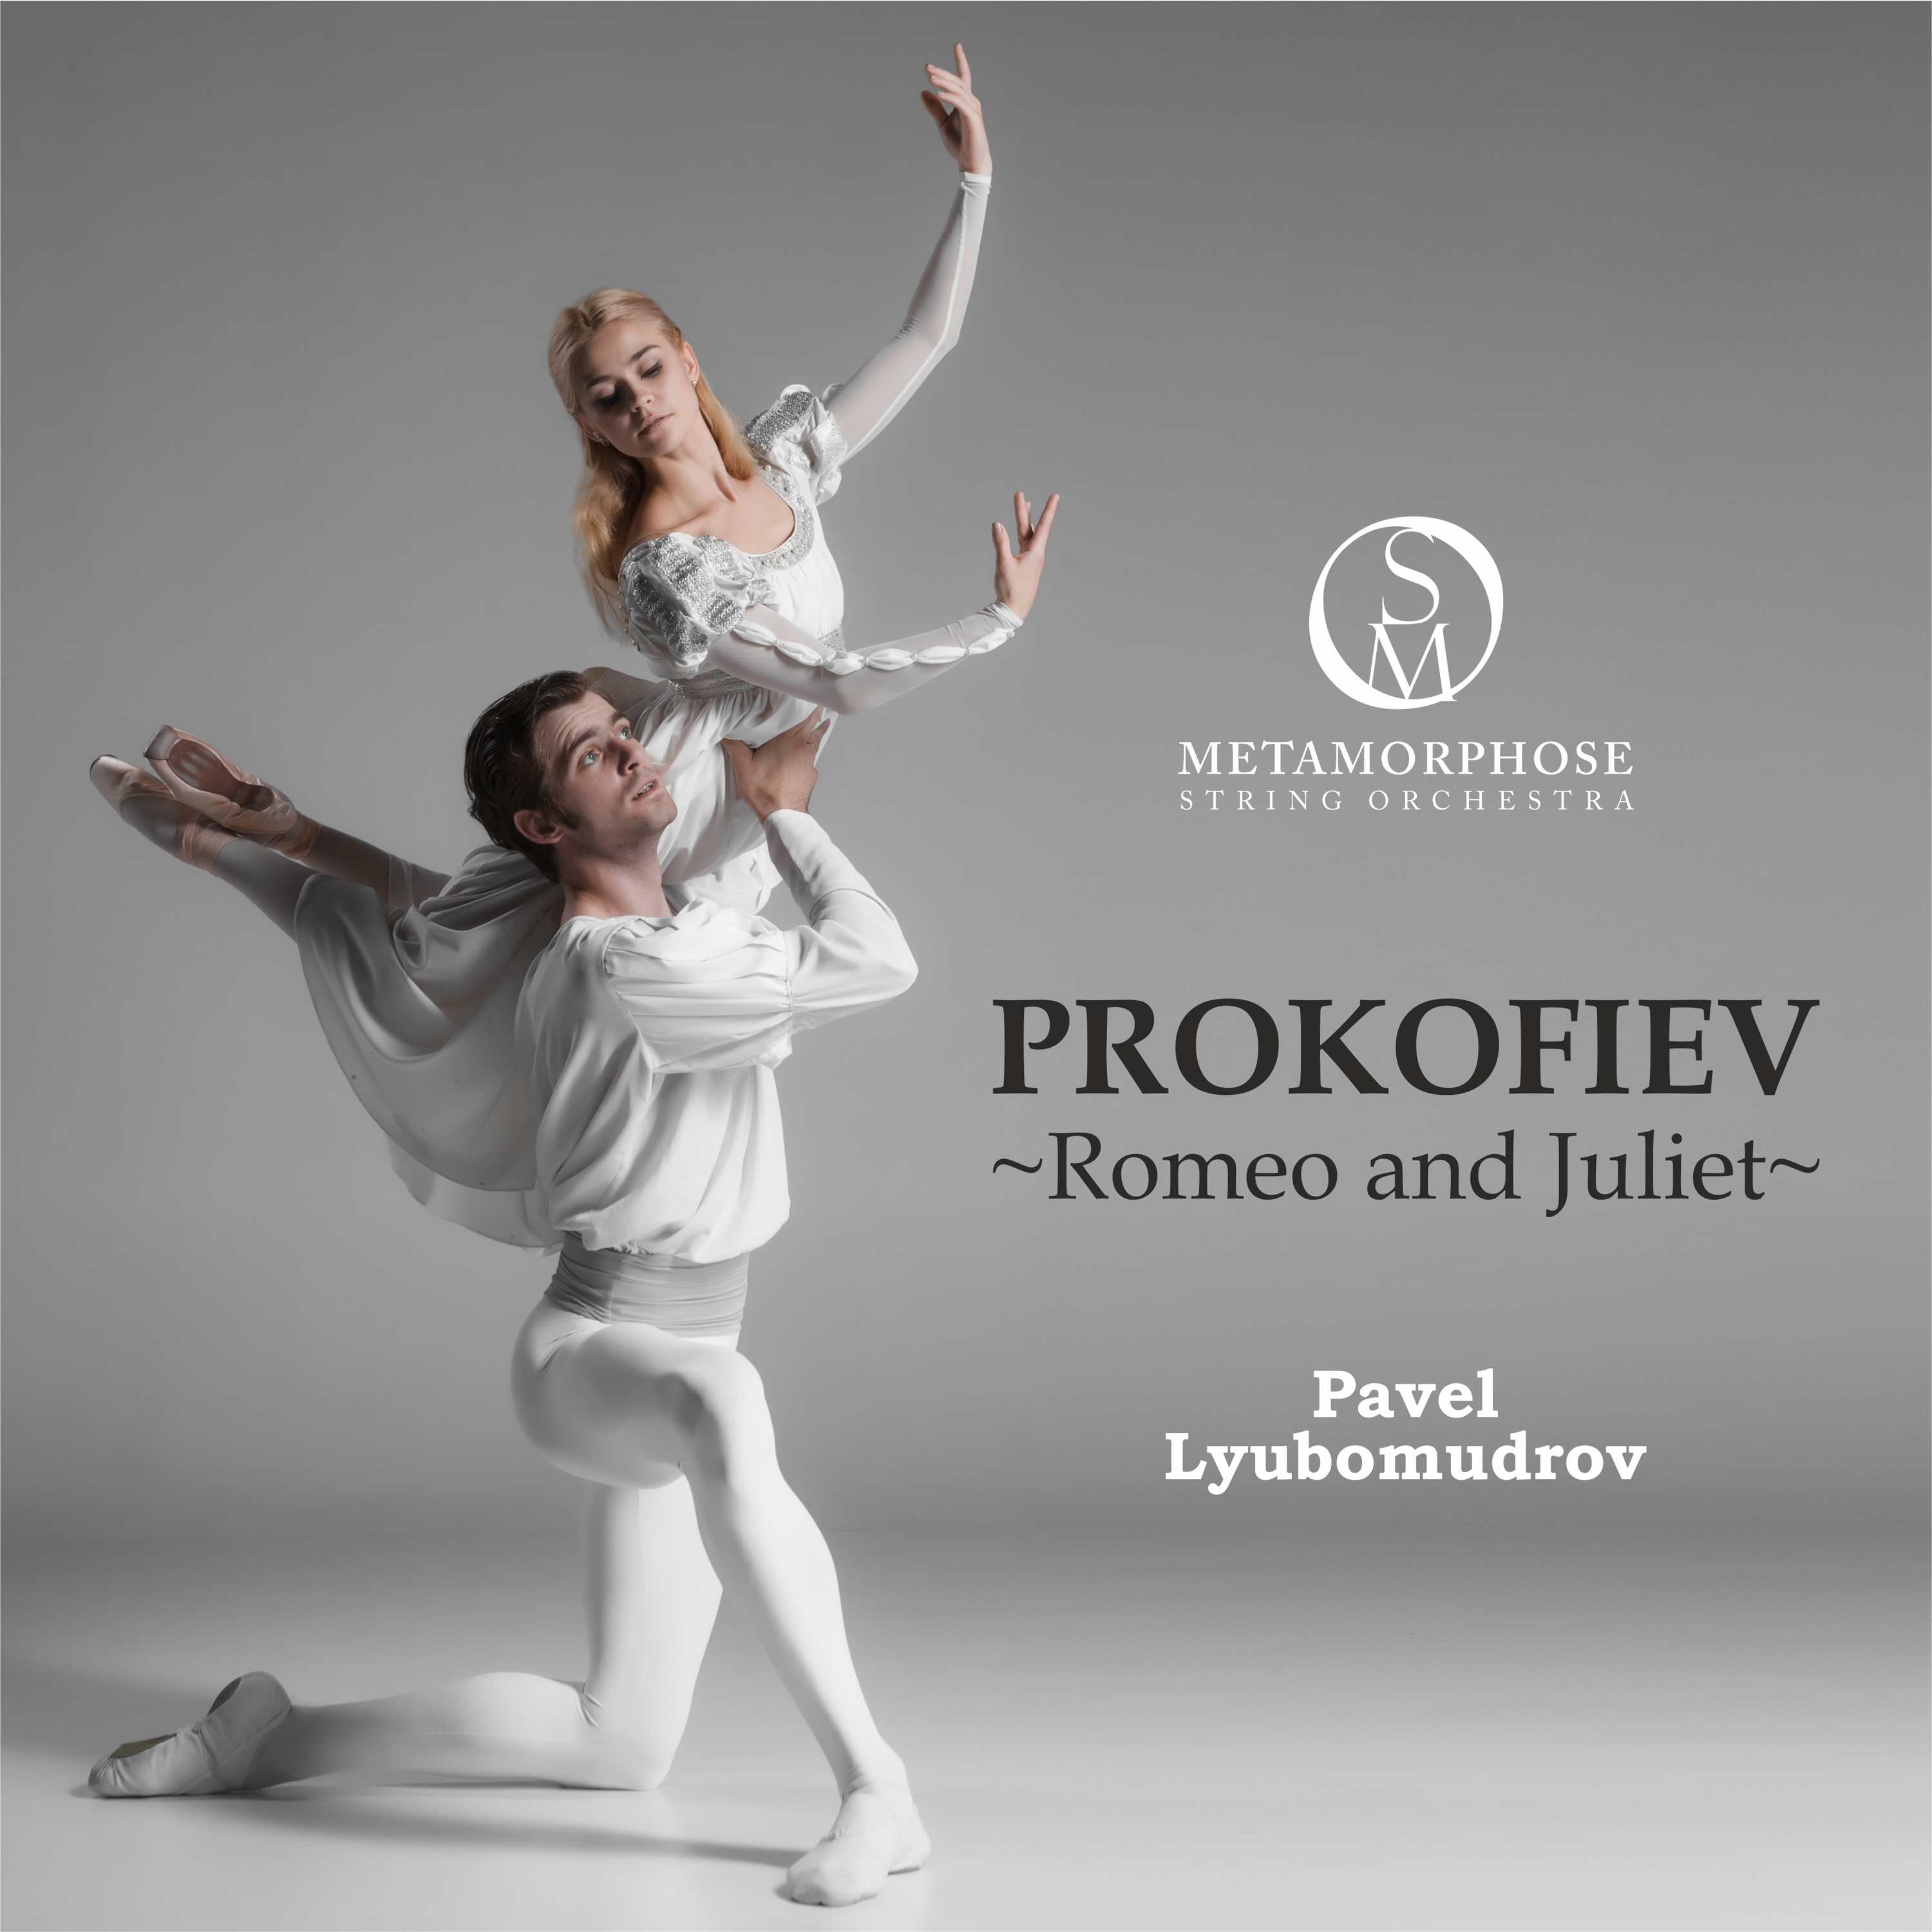 Prokofiev - Romeo and Juliet: Death of Tybalt, Friar Laurence